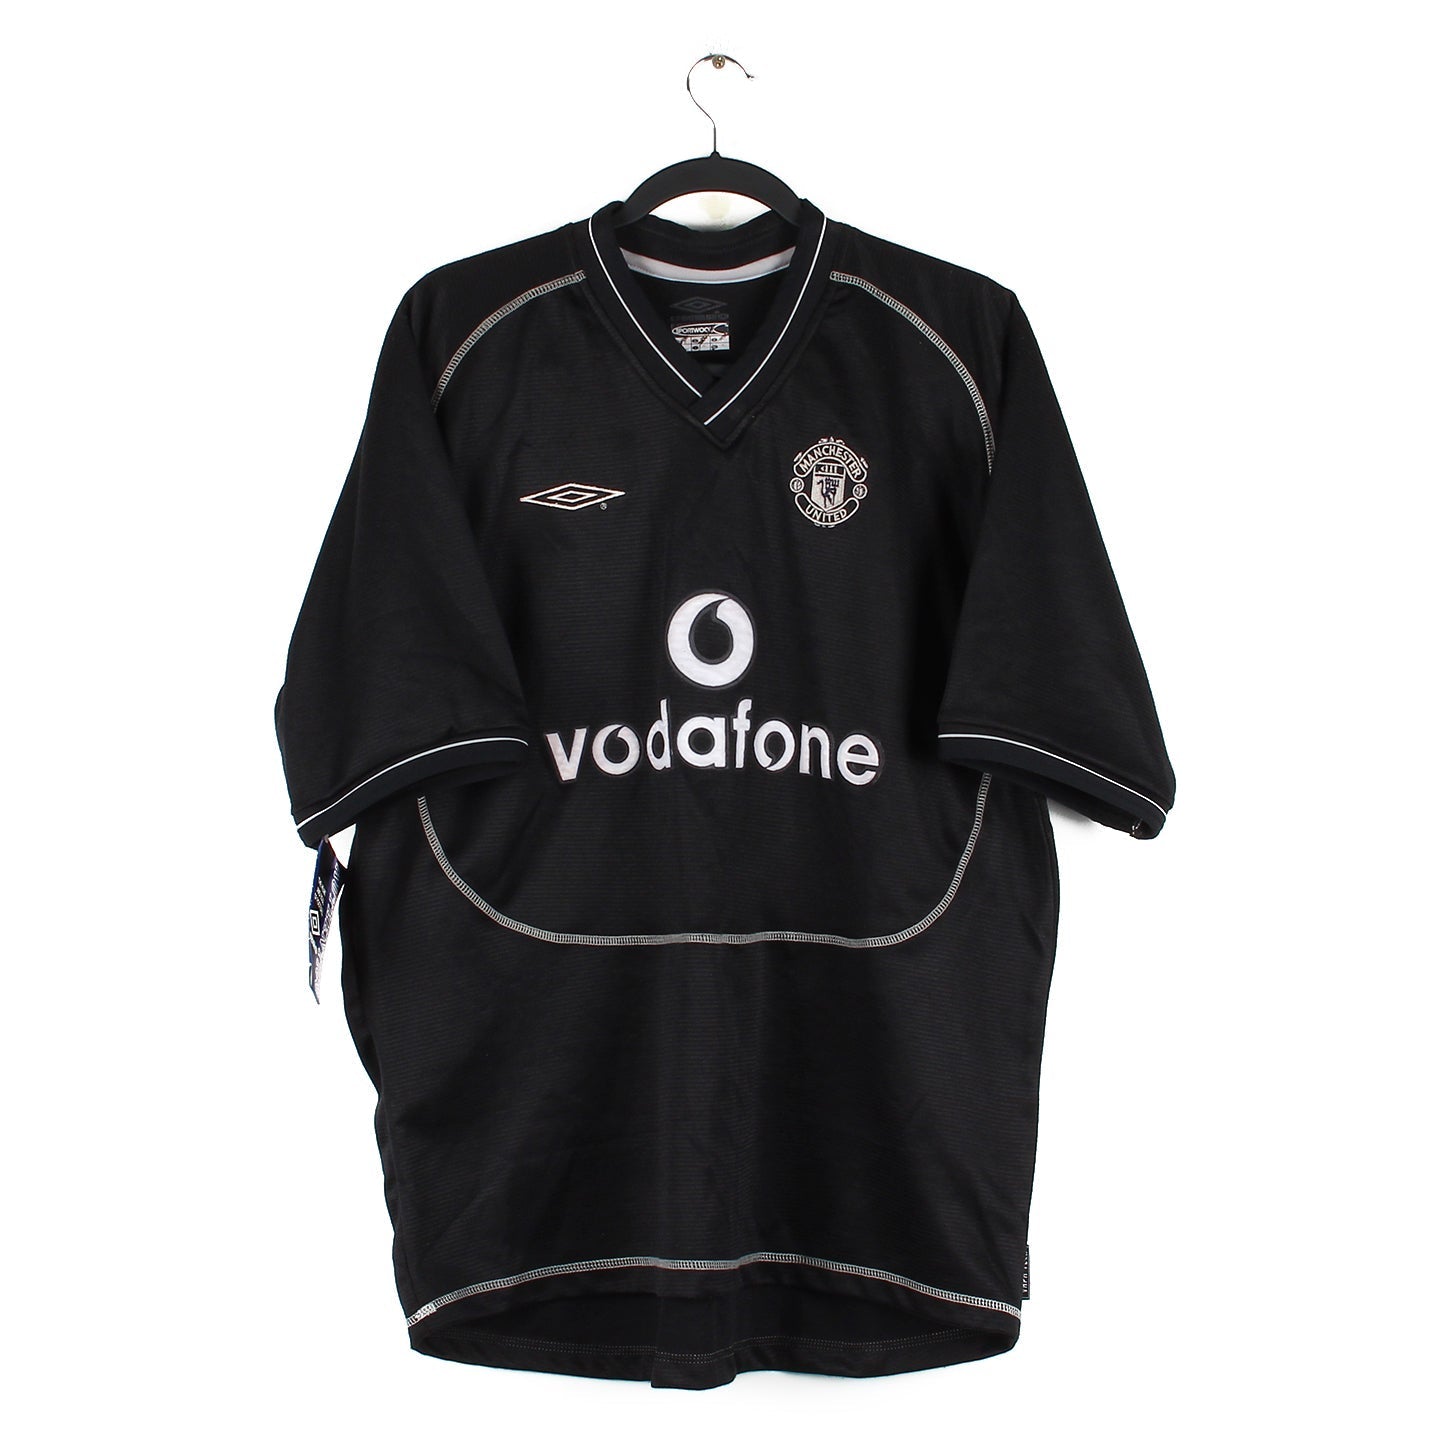 maillot manchester united 2000